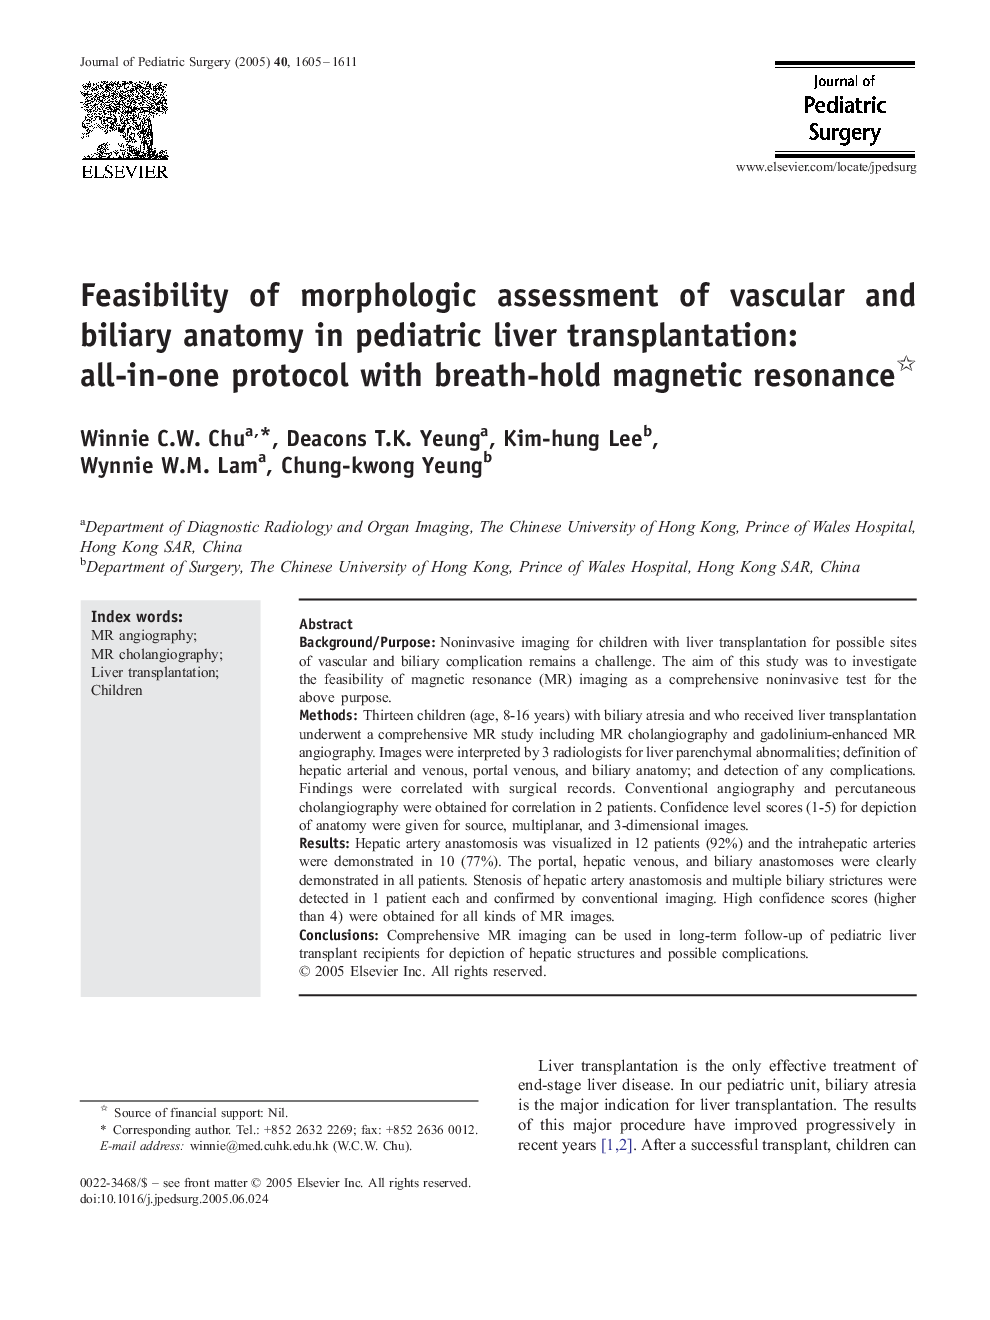 Feasibility of morphologic assessment of vascular and biliary anatomy in pediatric liver transplantation: all-in-one protocol with breath-hold magnetic resonance